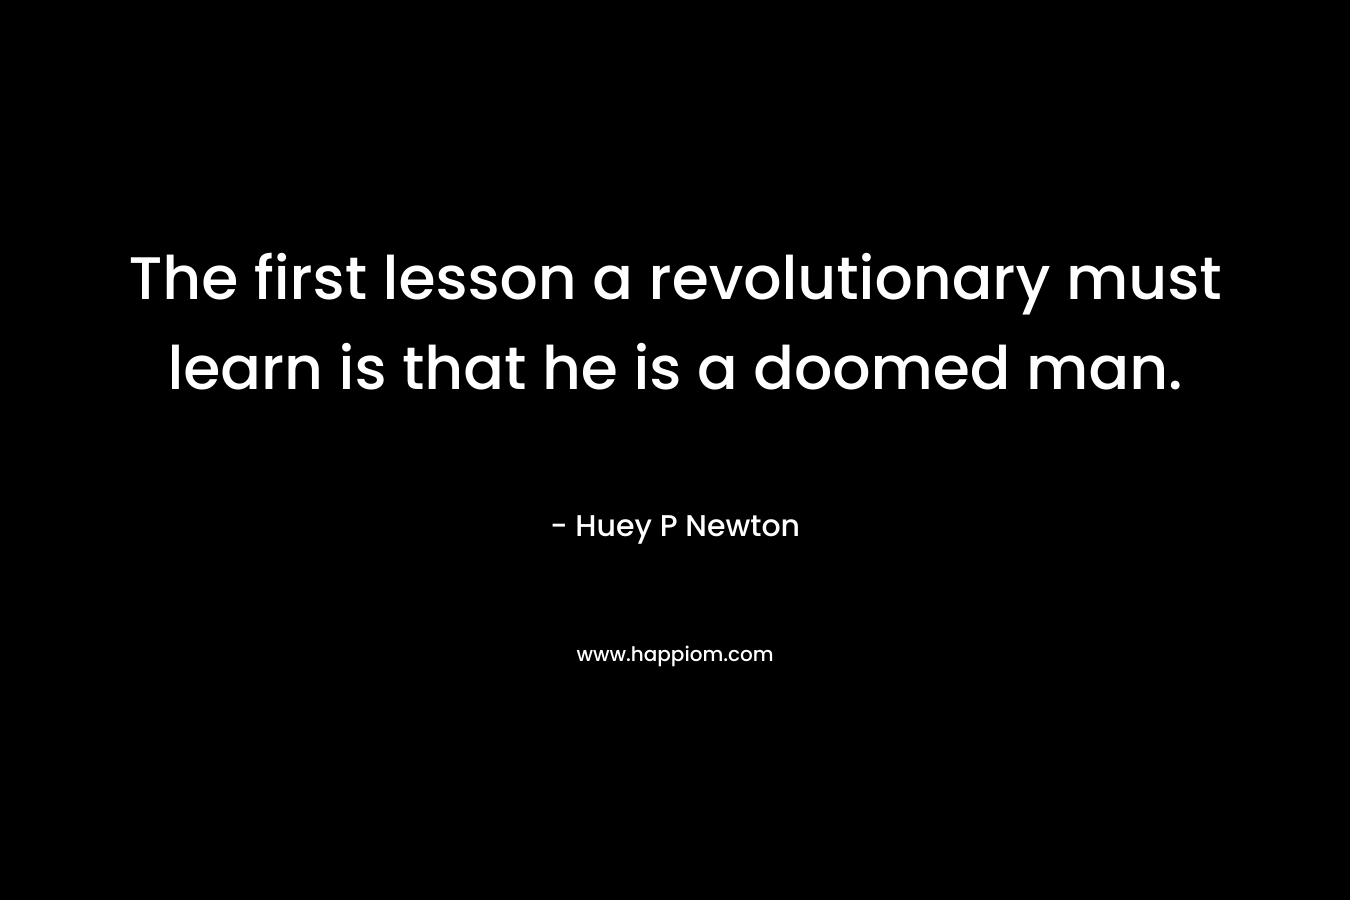 The first lesson a revolutionary must learn is that he is a doomed man. – Huey P Newton